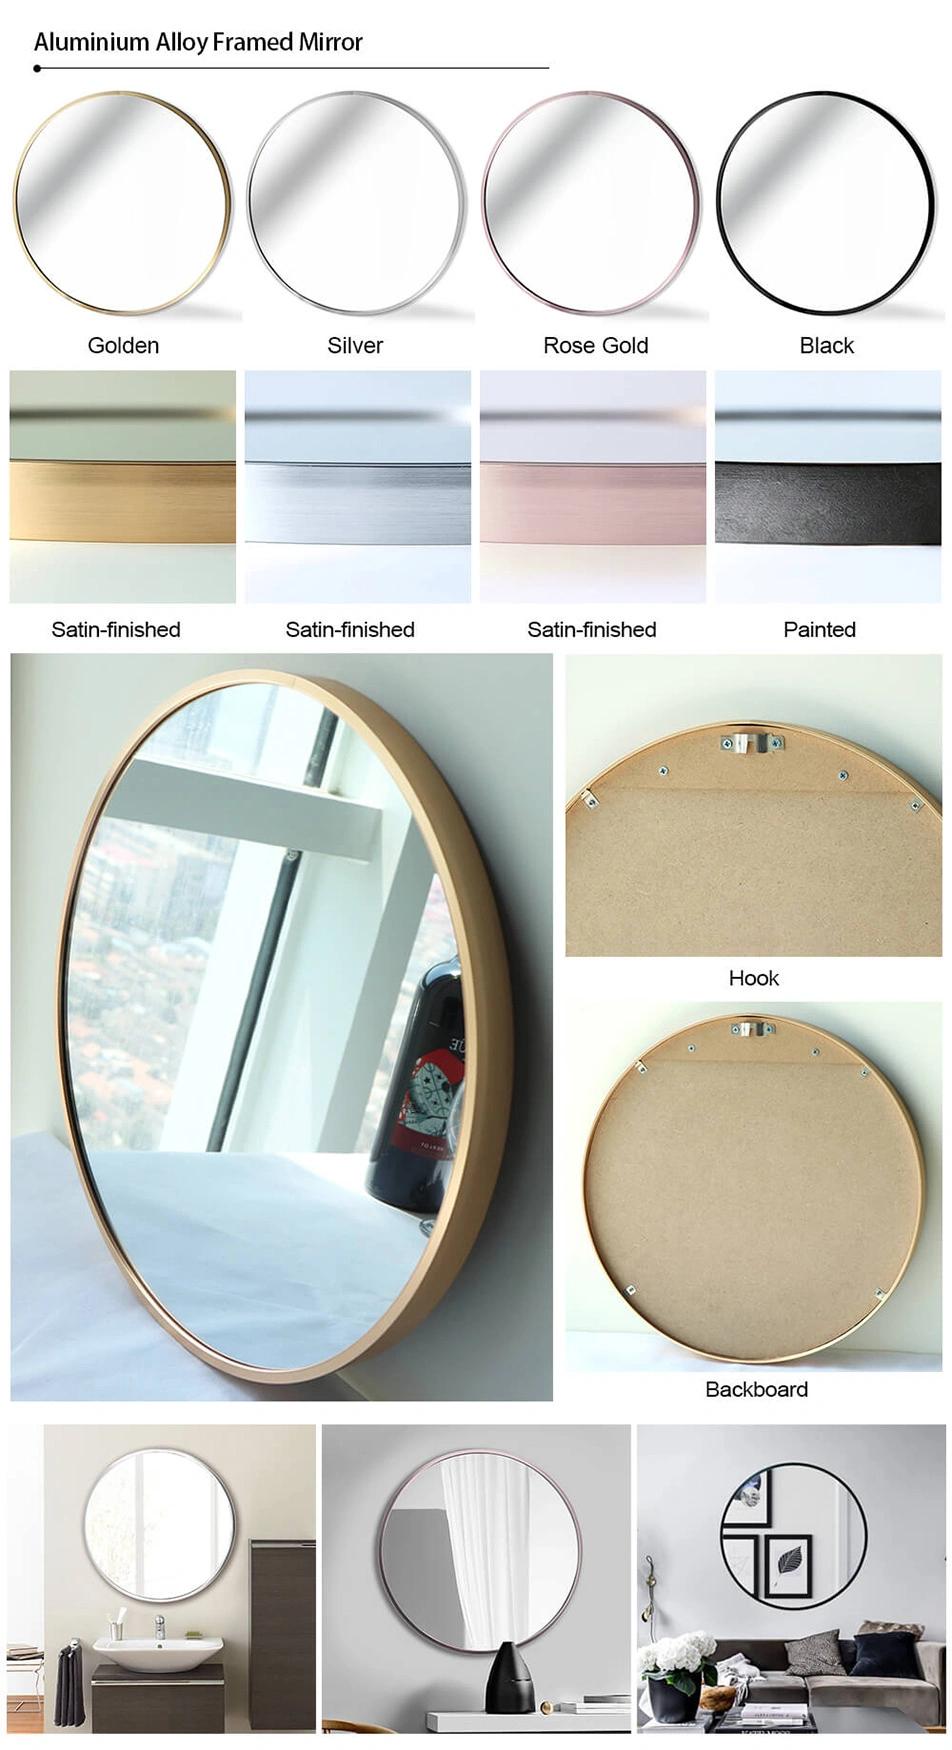 Hotel Wall Mounted Round Black White Brass Metal Aluminum Alloy Framed Bathroom Mirror for Home Decoration